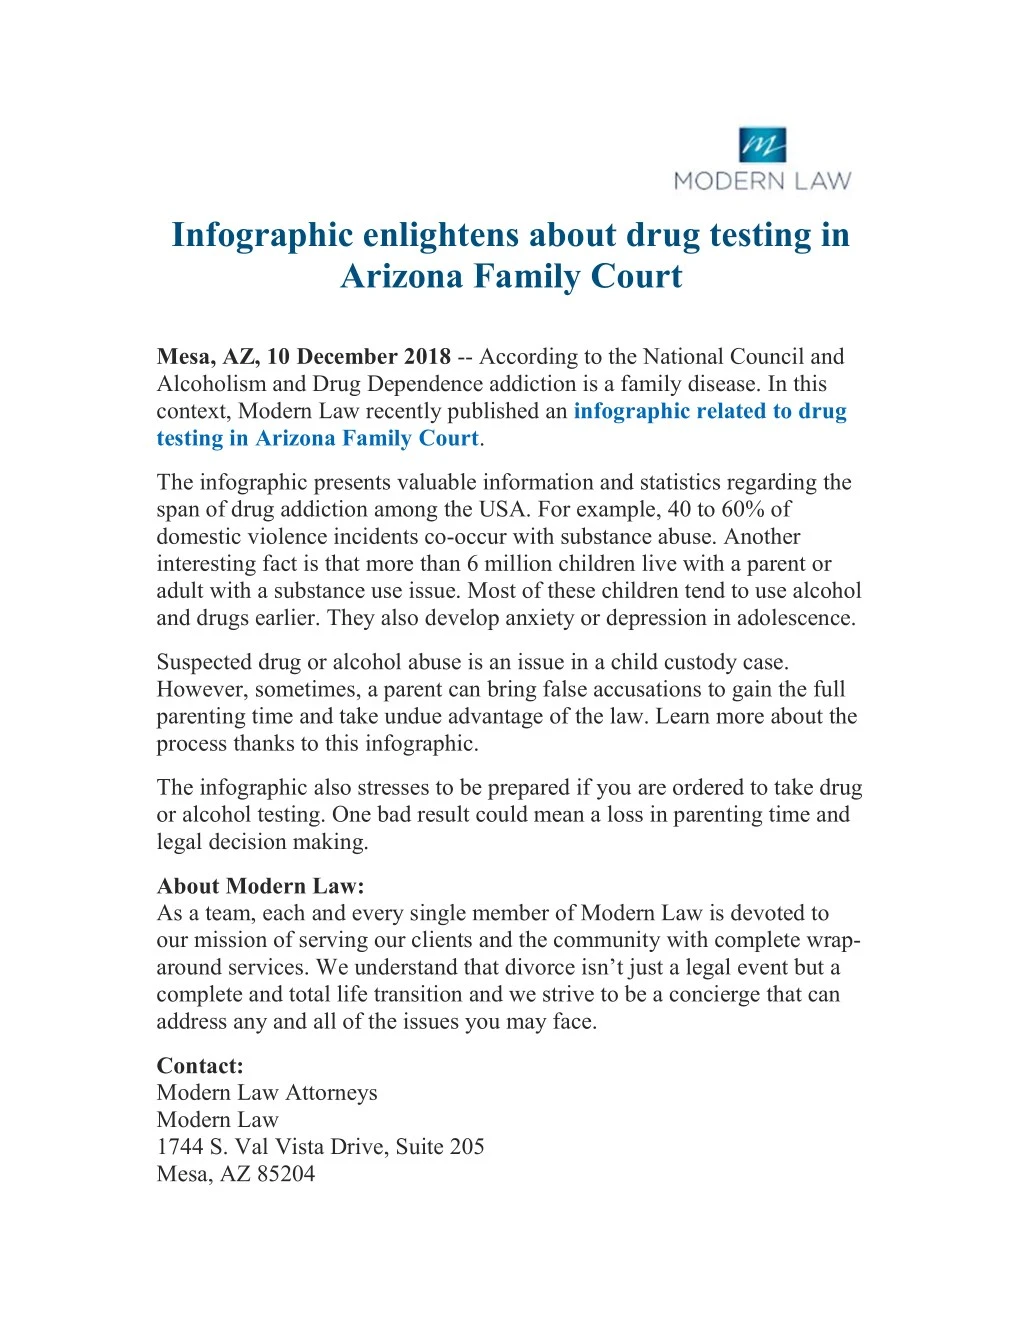 infographic enlightens about drug testing